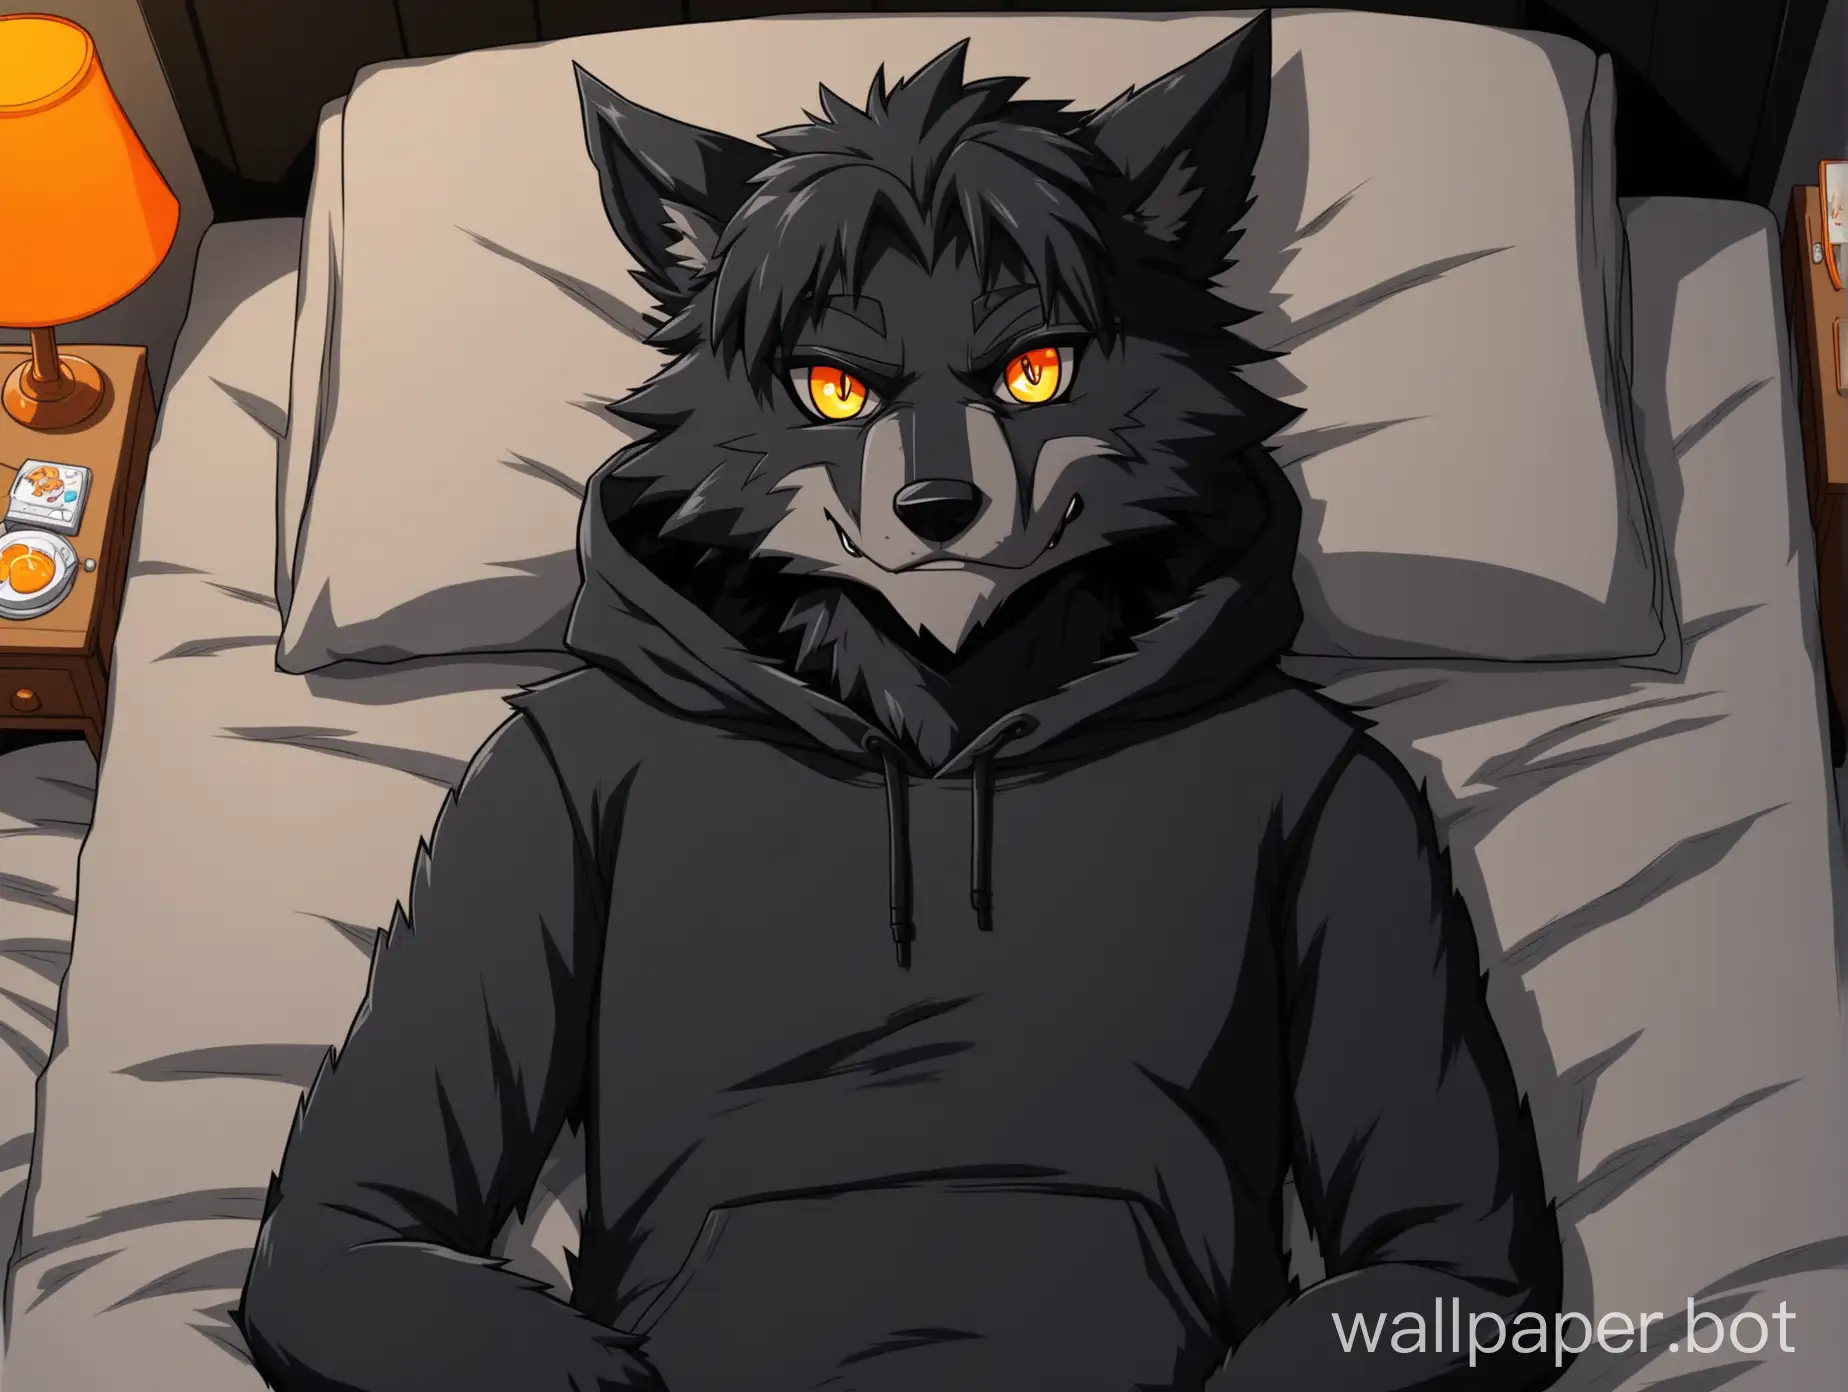 Timberwolf-Furry-Character-Relaxing-in-Bed-Cartoony-Anime-Style